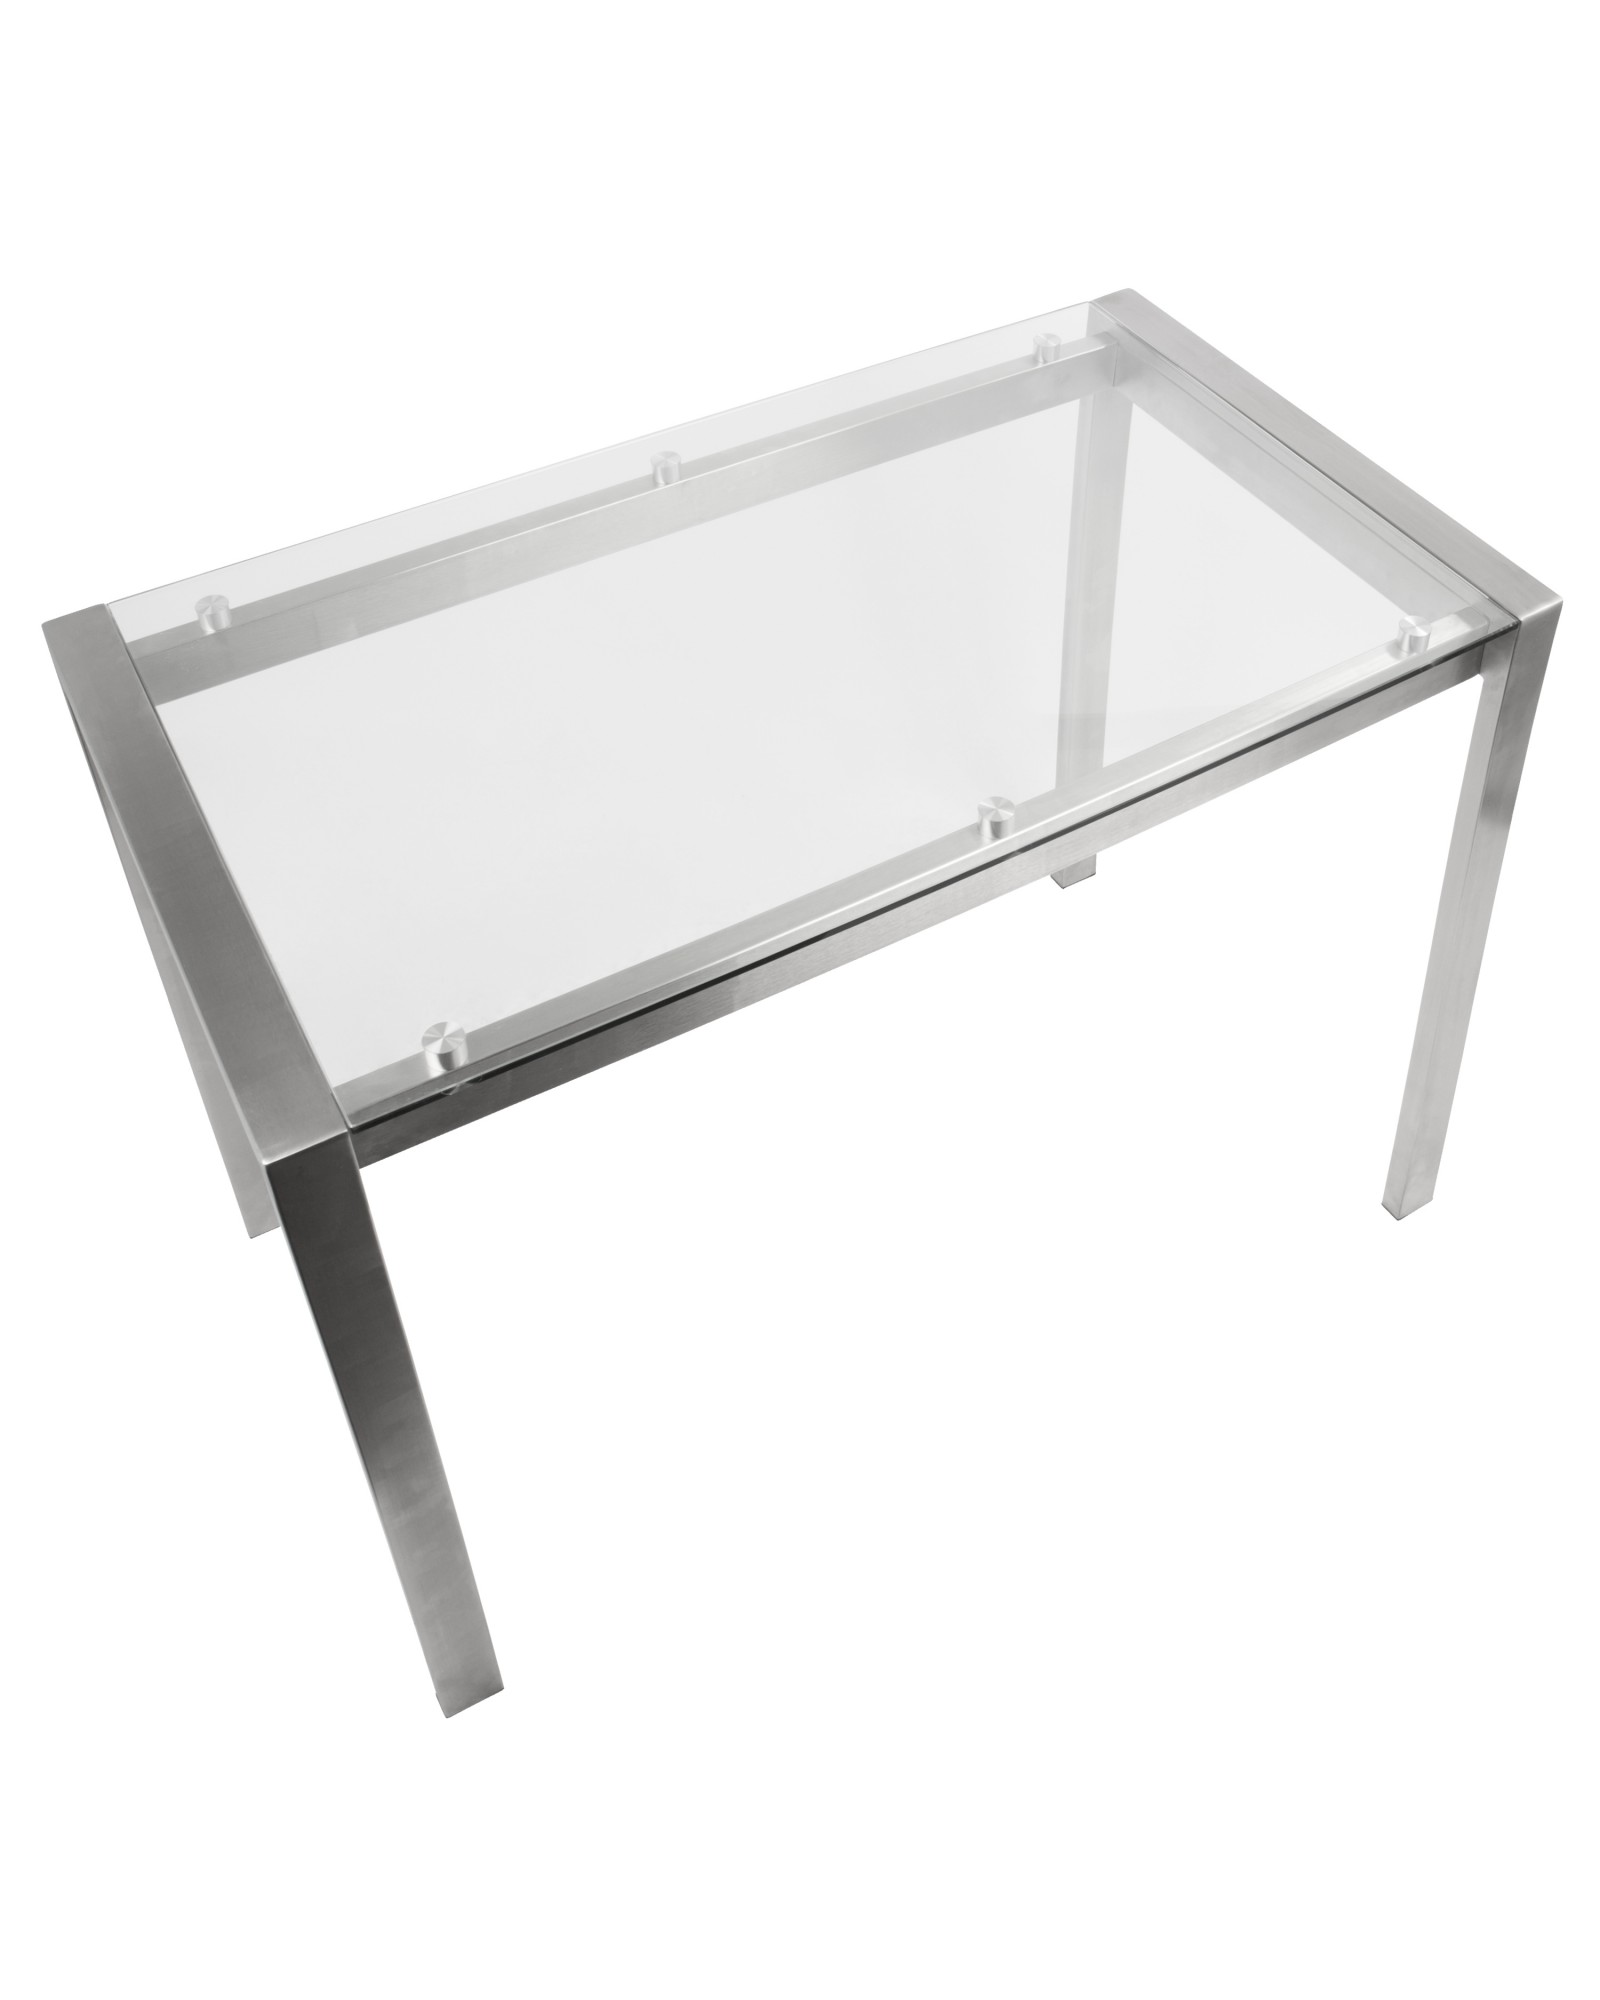 Fuji Contemporary Counter Table in Stainless Steel and Clear Glass